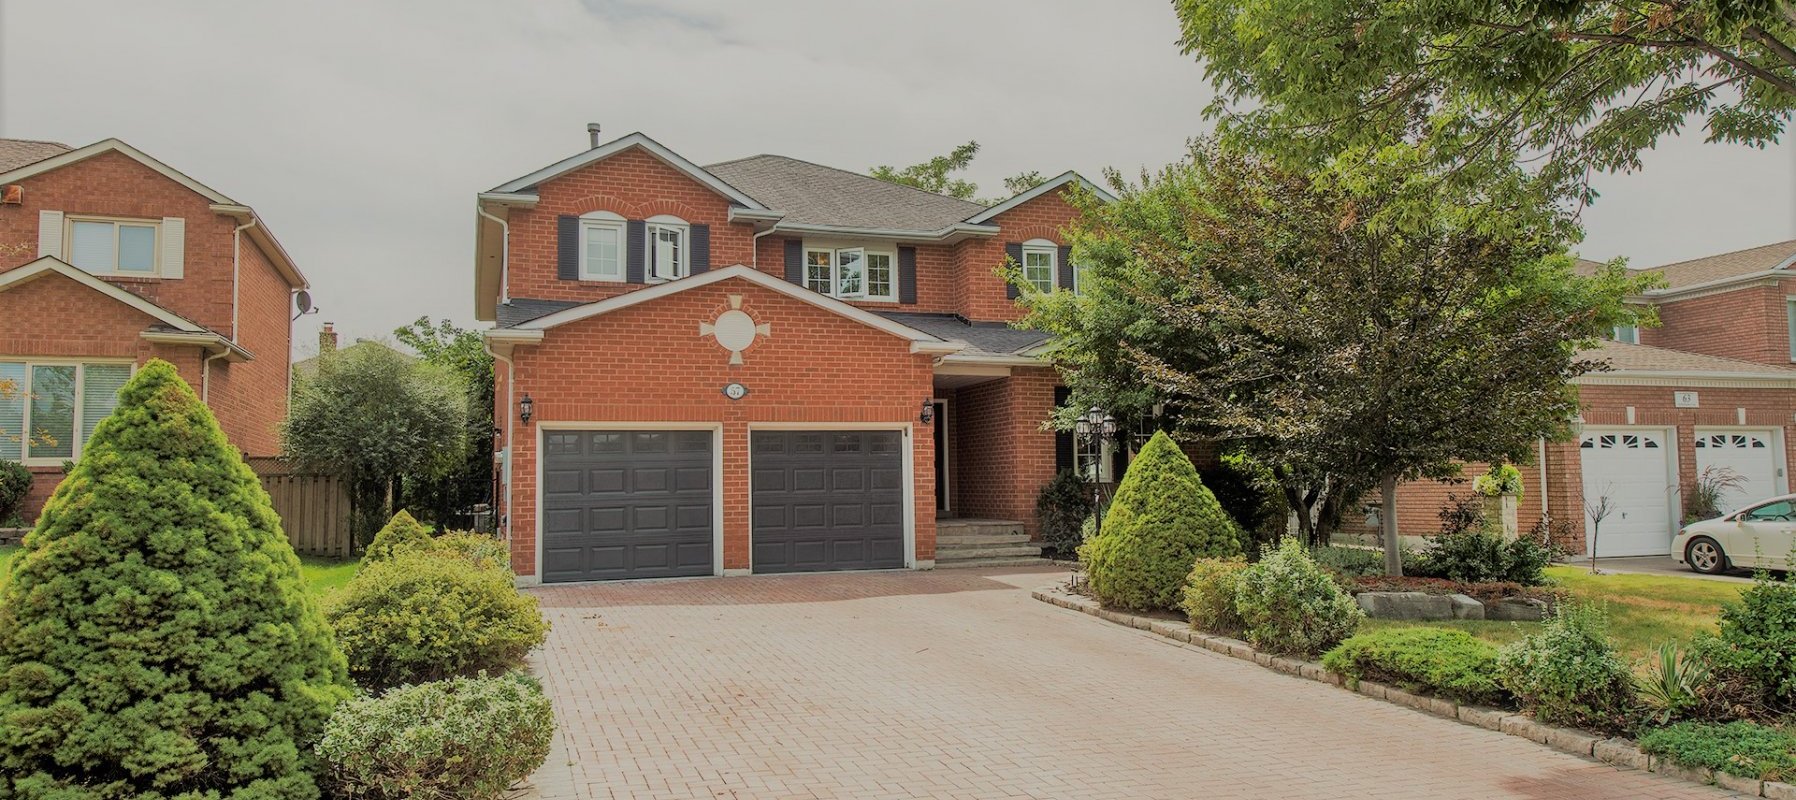 Sell My House Fast in Markham